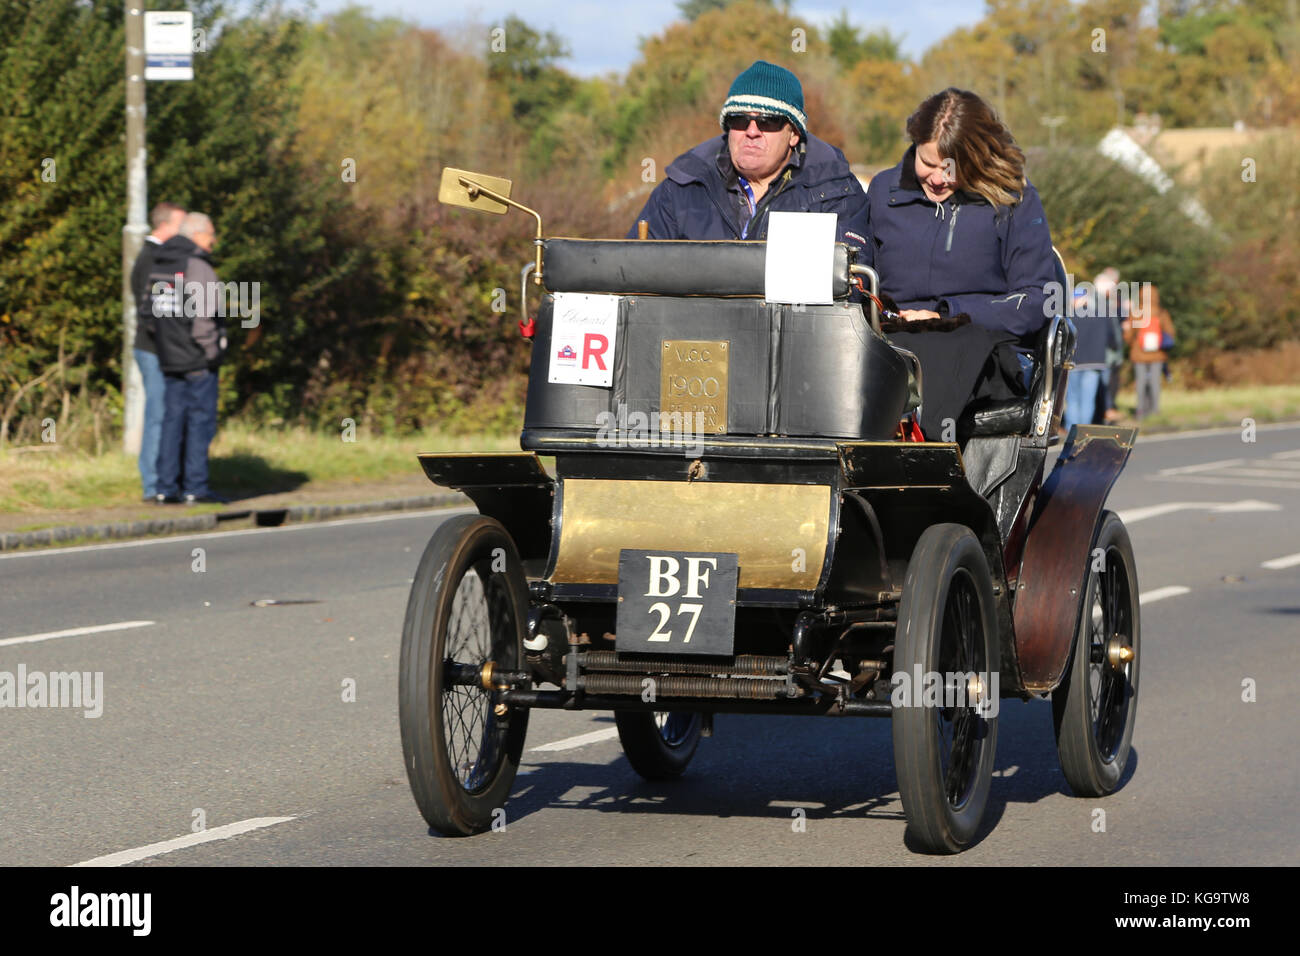 London, UK. 5th Nov, 2017. De Dion-Bouton: BF 27 competes in the London to Brighton Vintage Car Rally 2017. Credit: Richard avis/Alamy Live News Stock Photo